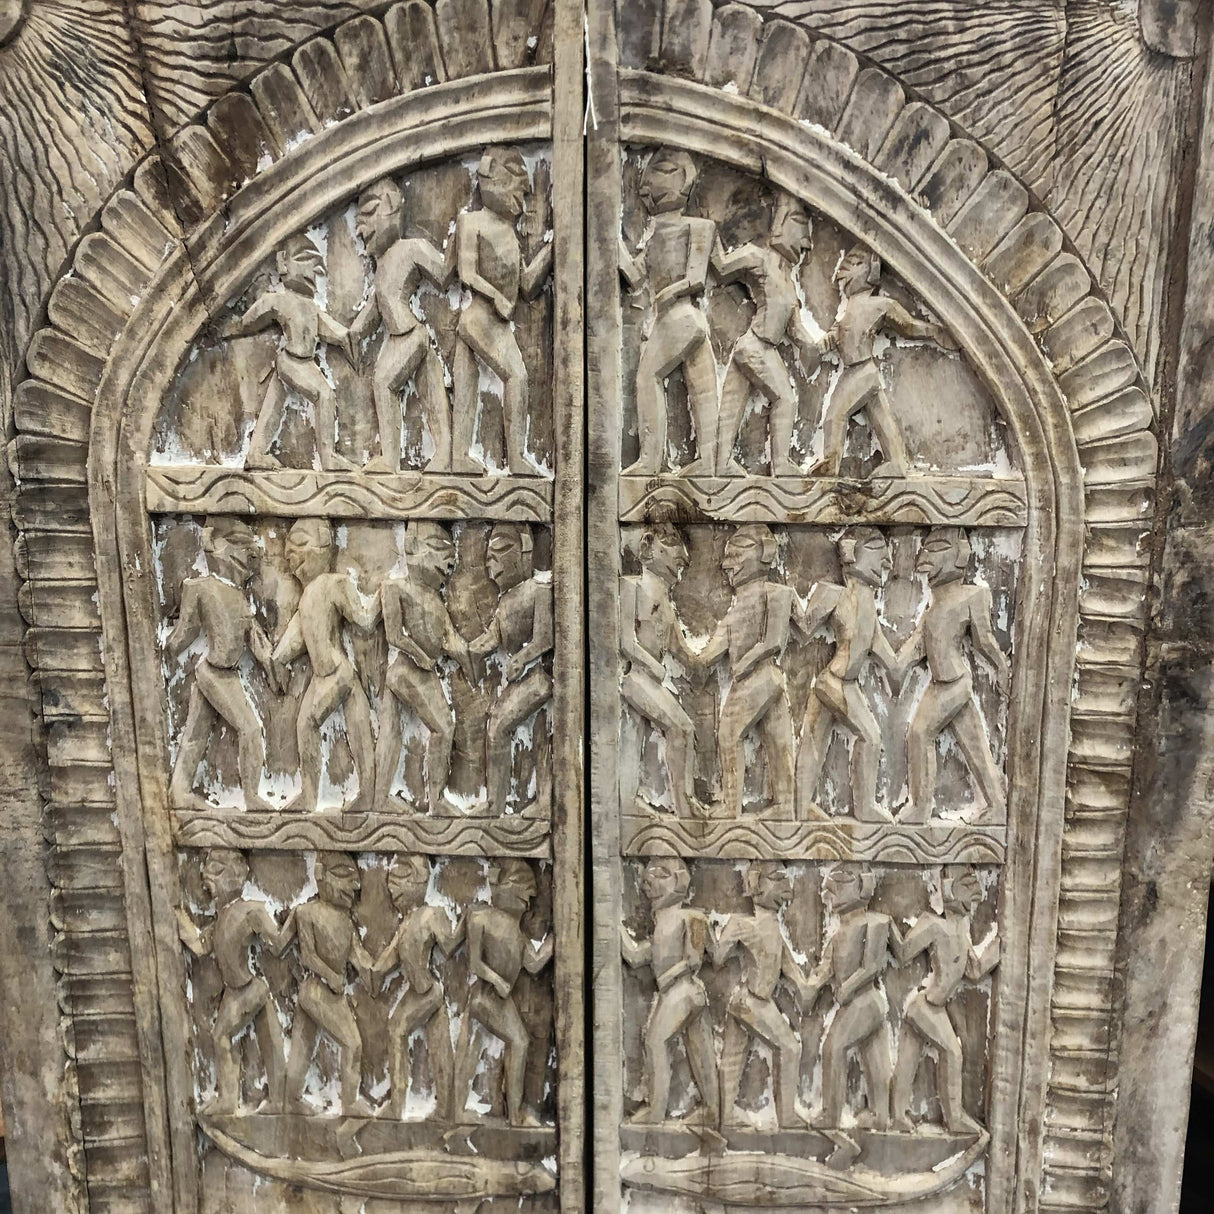 Home Decor Indian Handmade Door Panel Ornate Anqitue Carved Wooden Art Panel from India - Impulse Imports